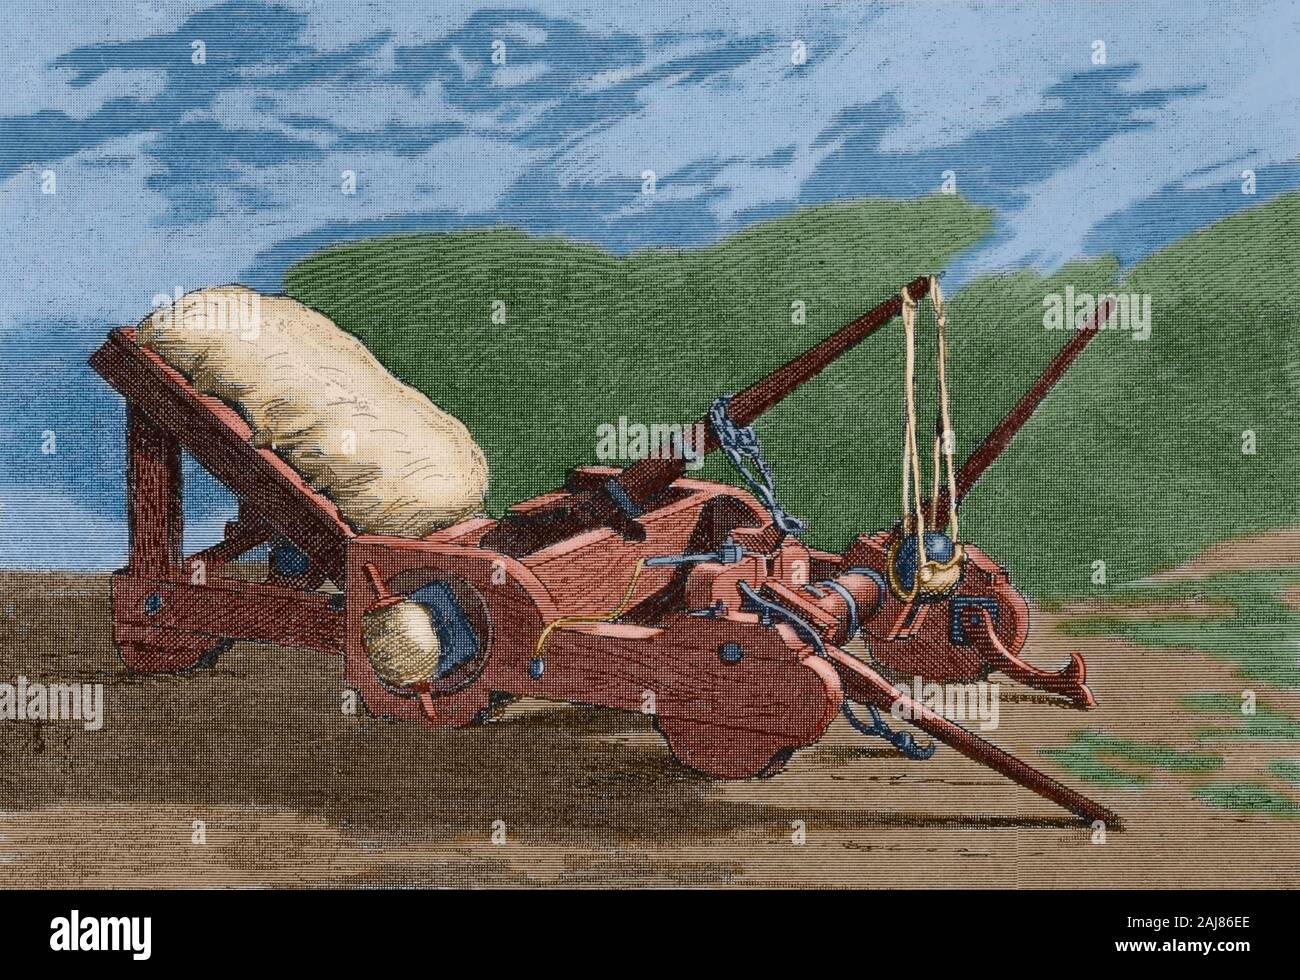 Onager. It was an imperial Roman torsion powered siege engine. Engraving. Museo Militar, 1883. Later colouration. Stock Photo